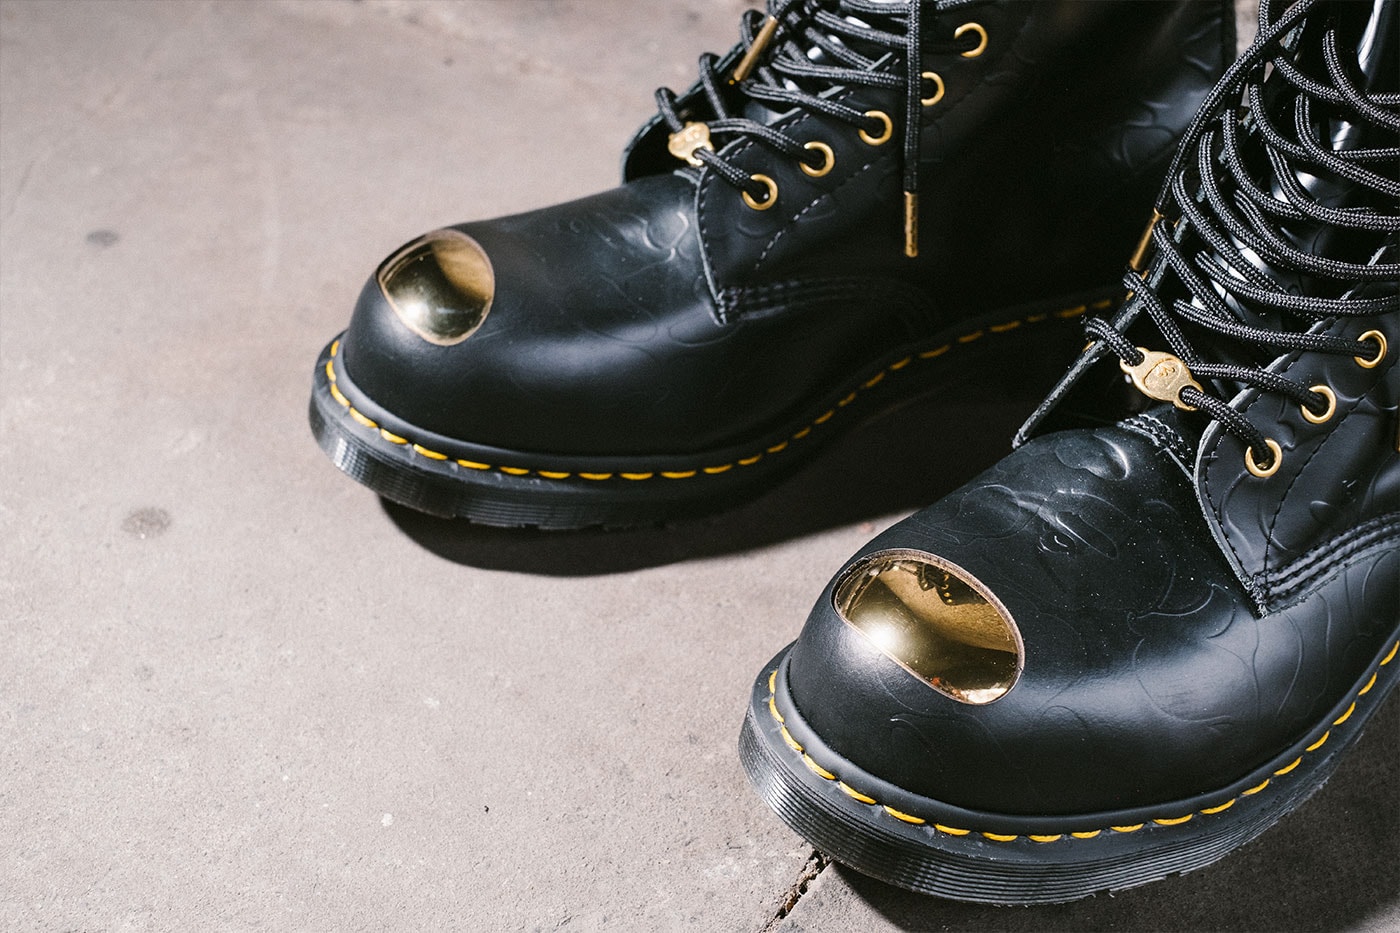 BAPE x Dr. Martens Steel Toe Boots Launch Event lookbook green black leather 10-eye and 3-eye boots